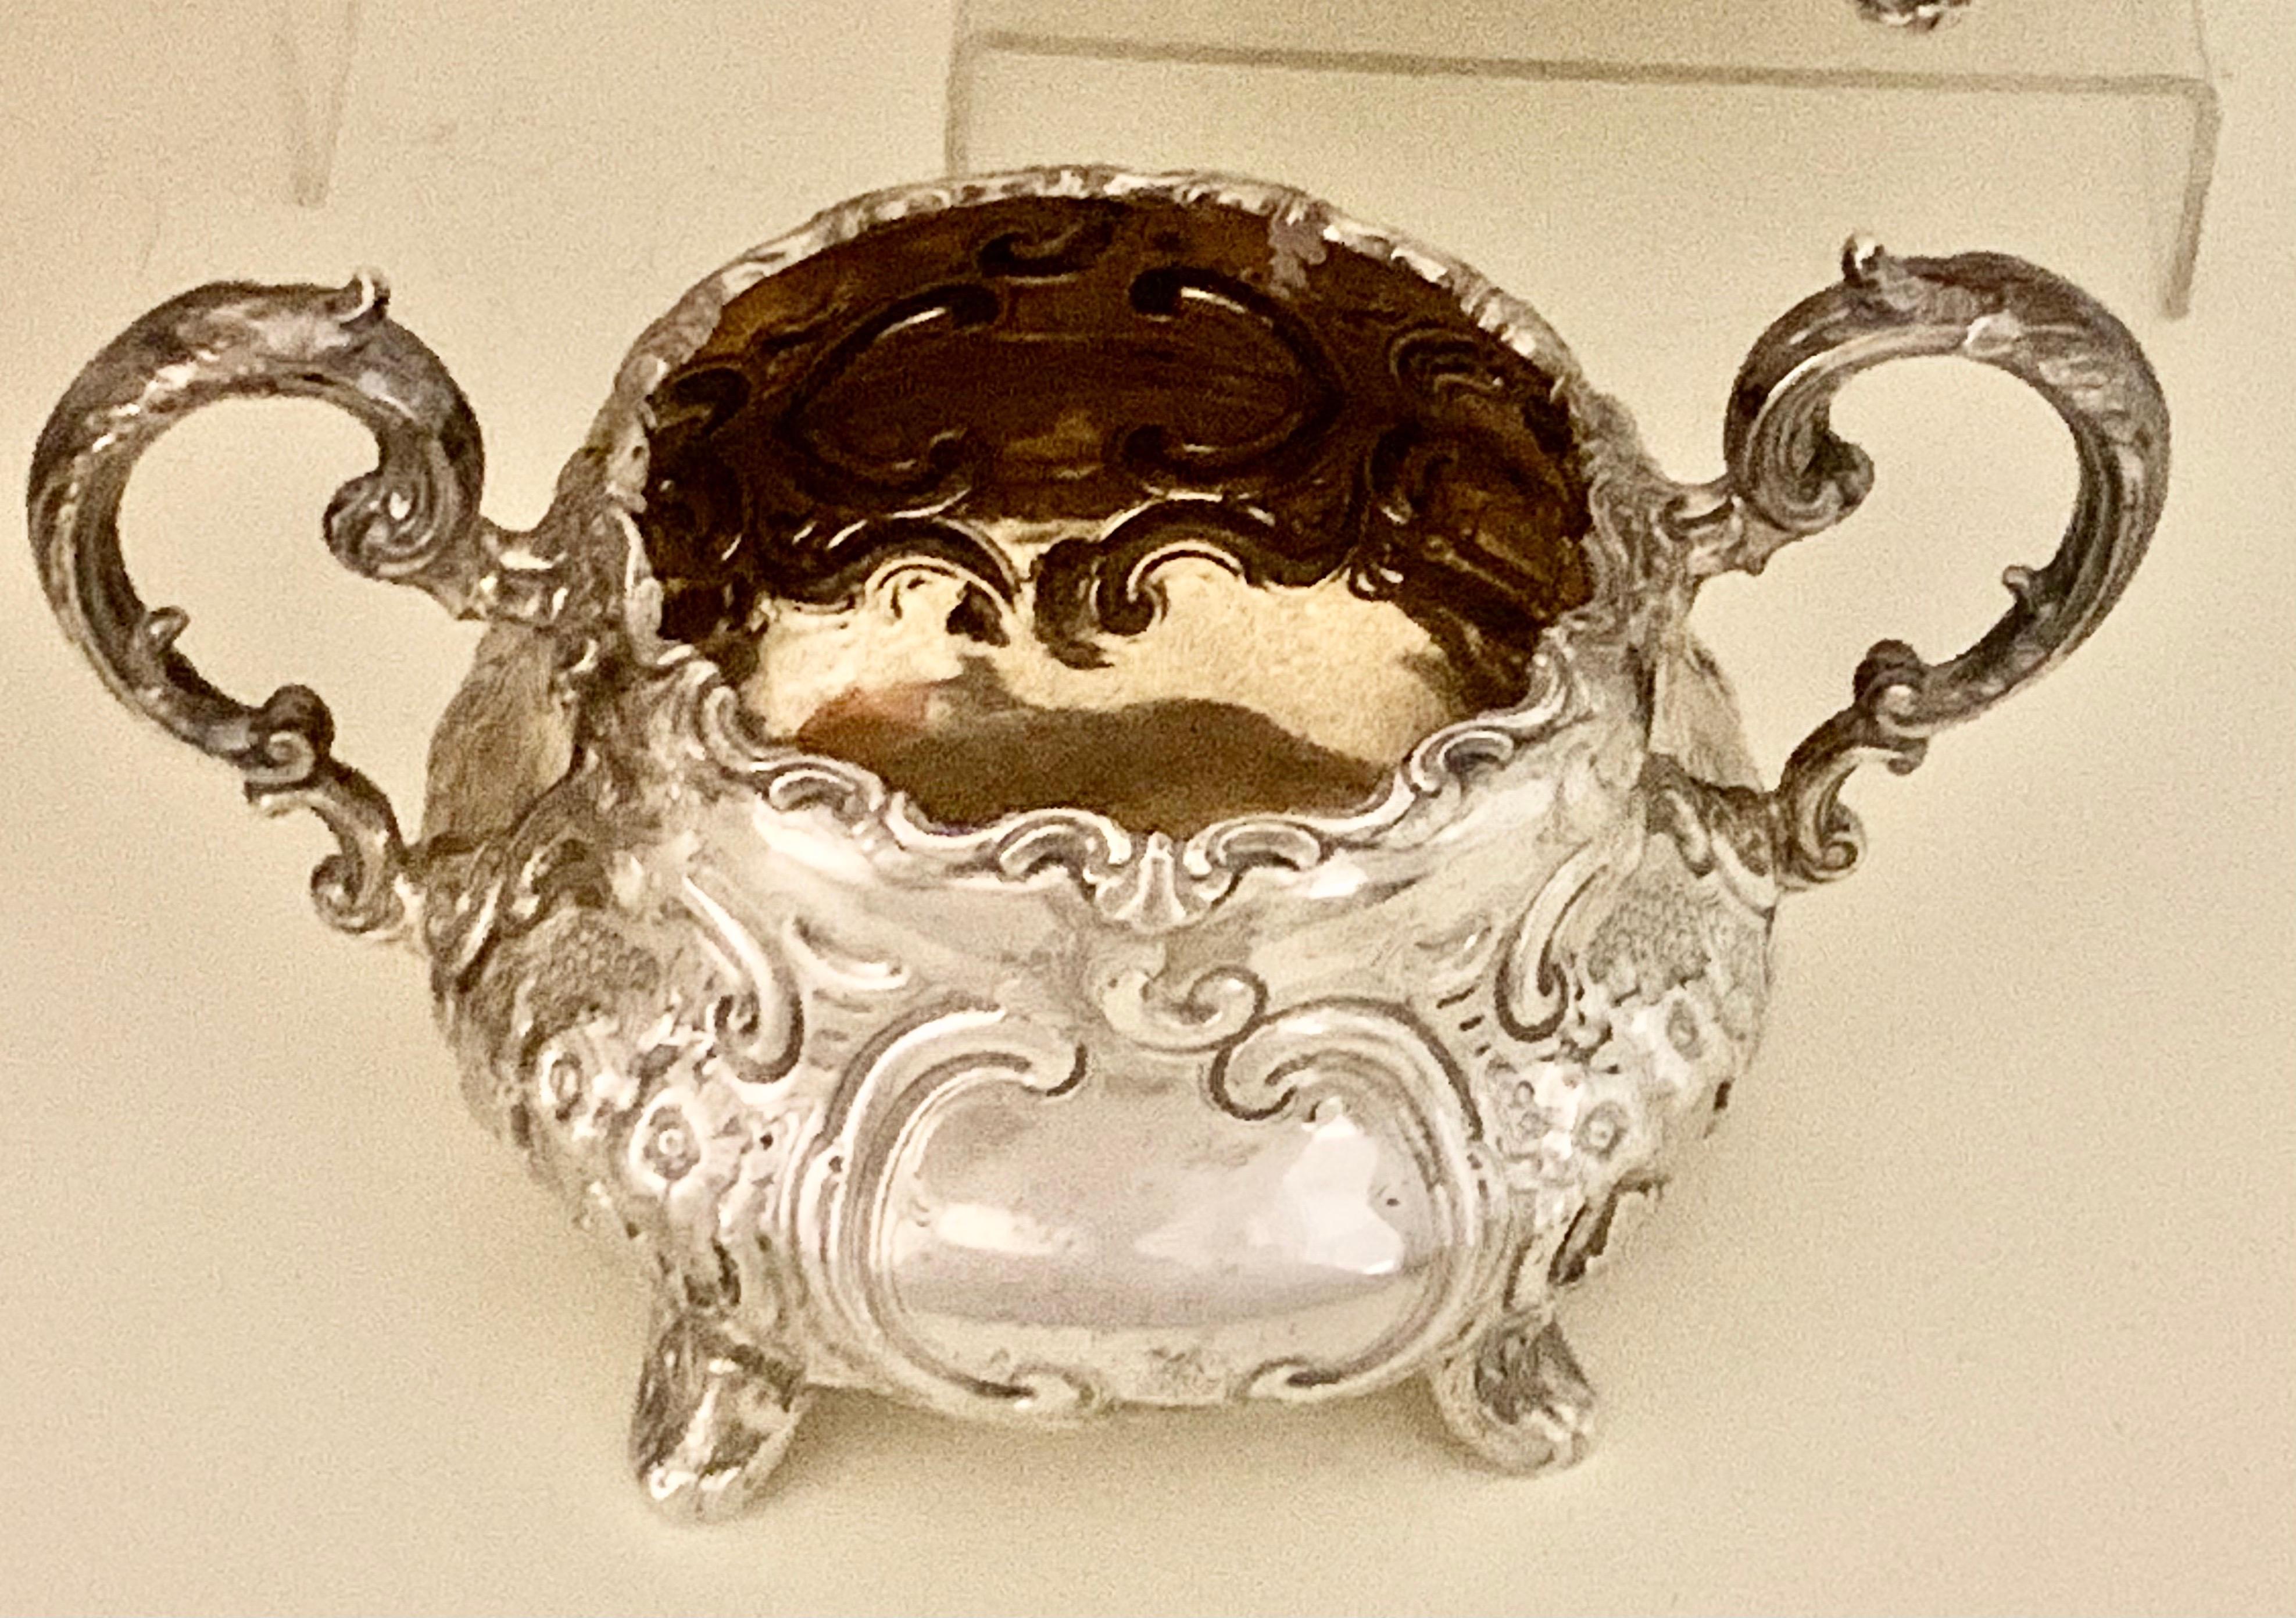 Cast Victorian Sterling Silver Tea and Coffee Service by william Smiley, London, 1860